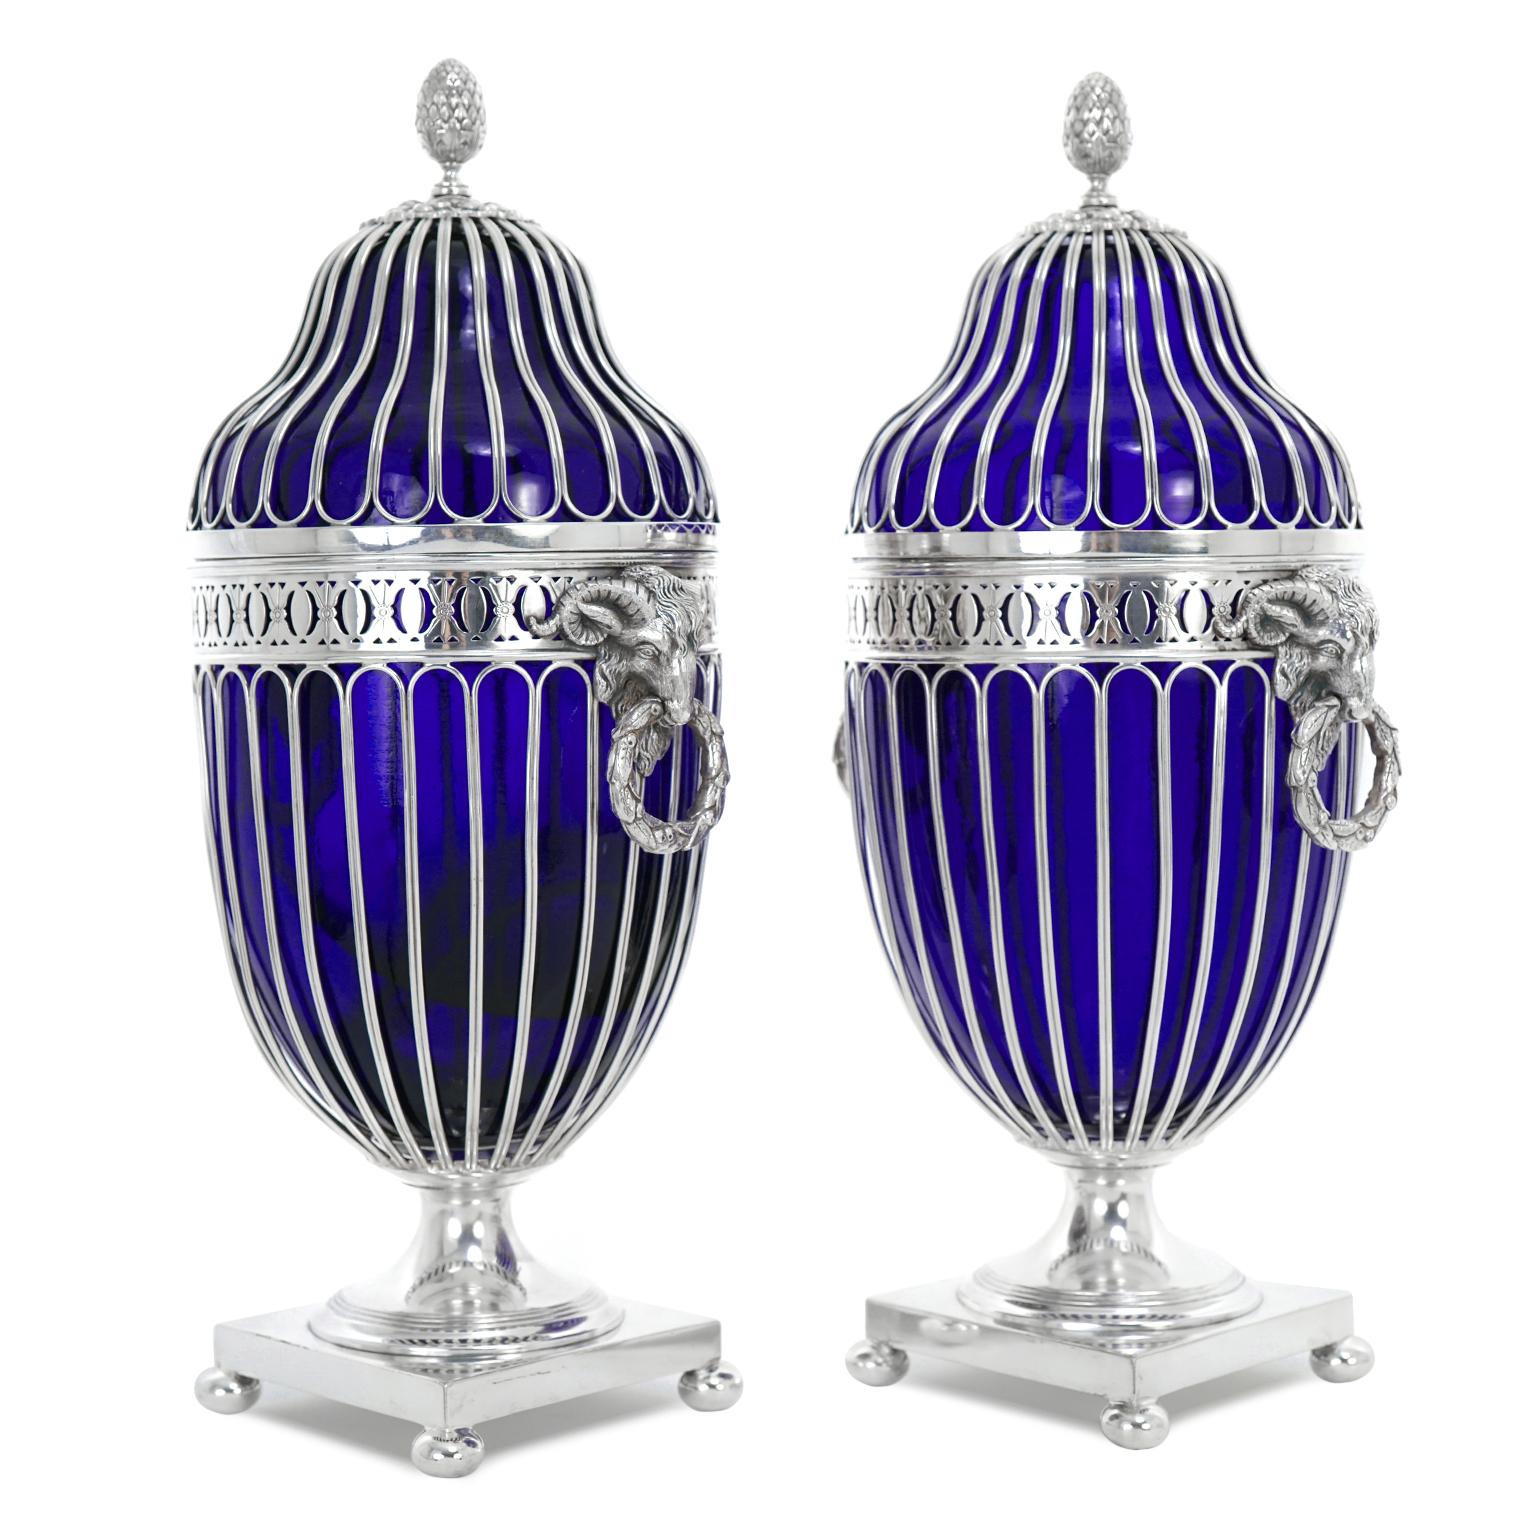 British Pair of English Silver-Plate Chestnut Urns, C 1920s For Sale